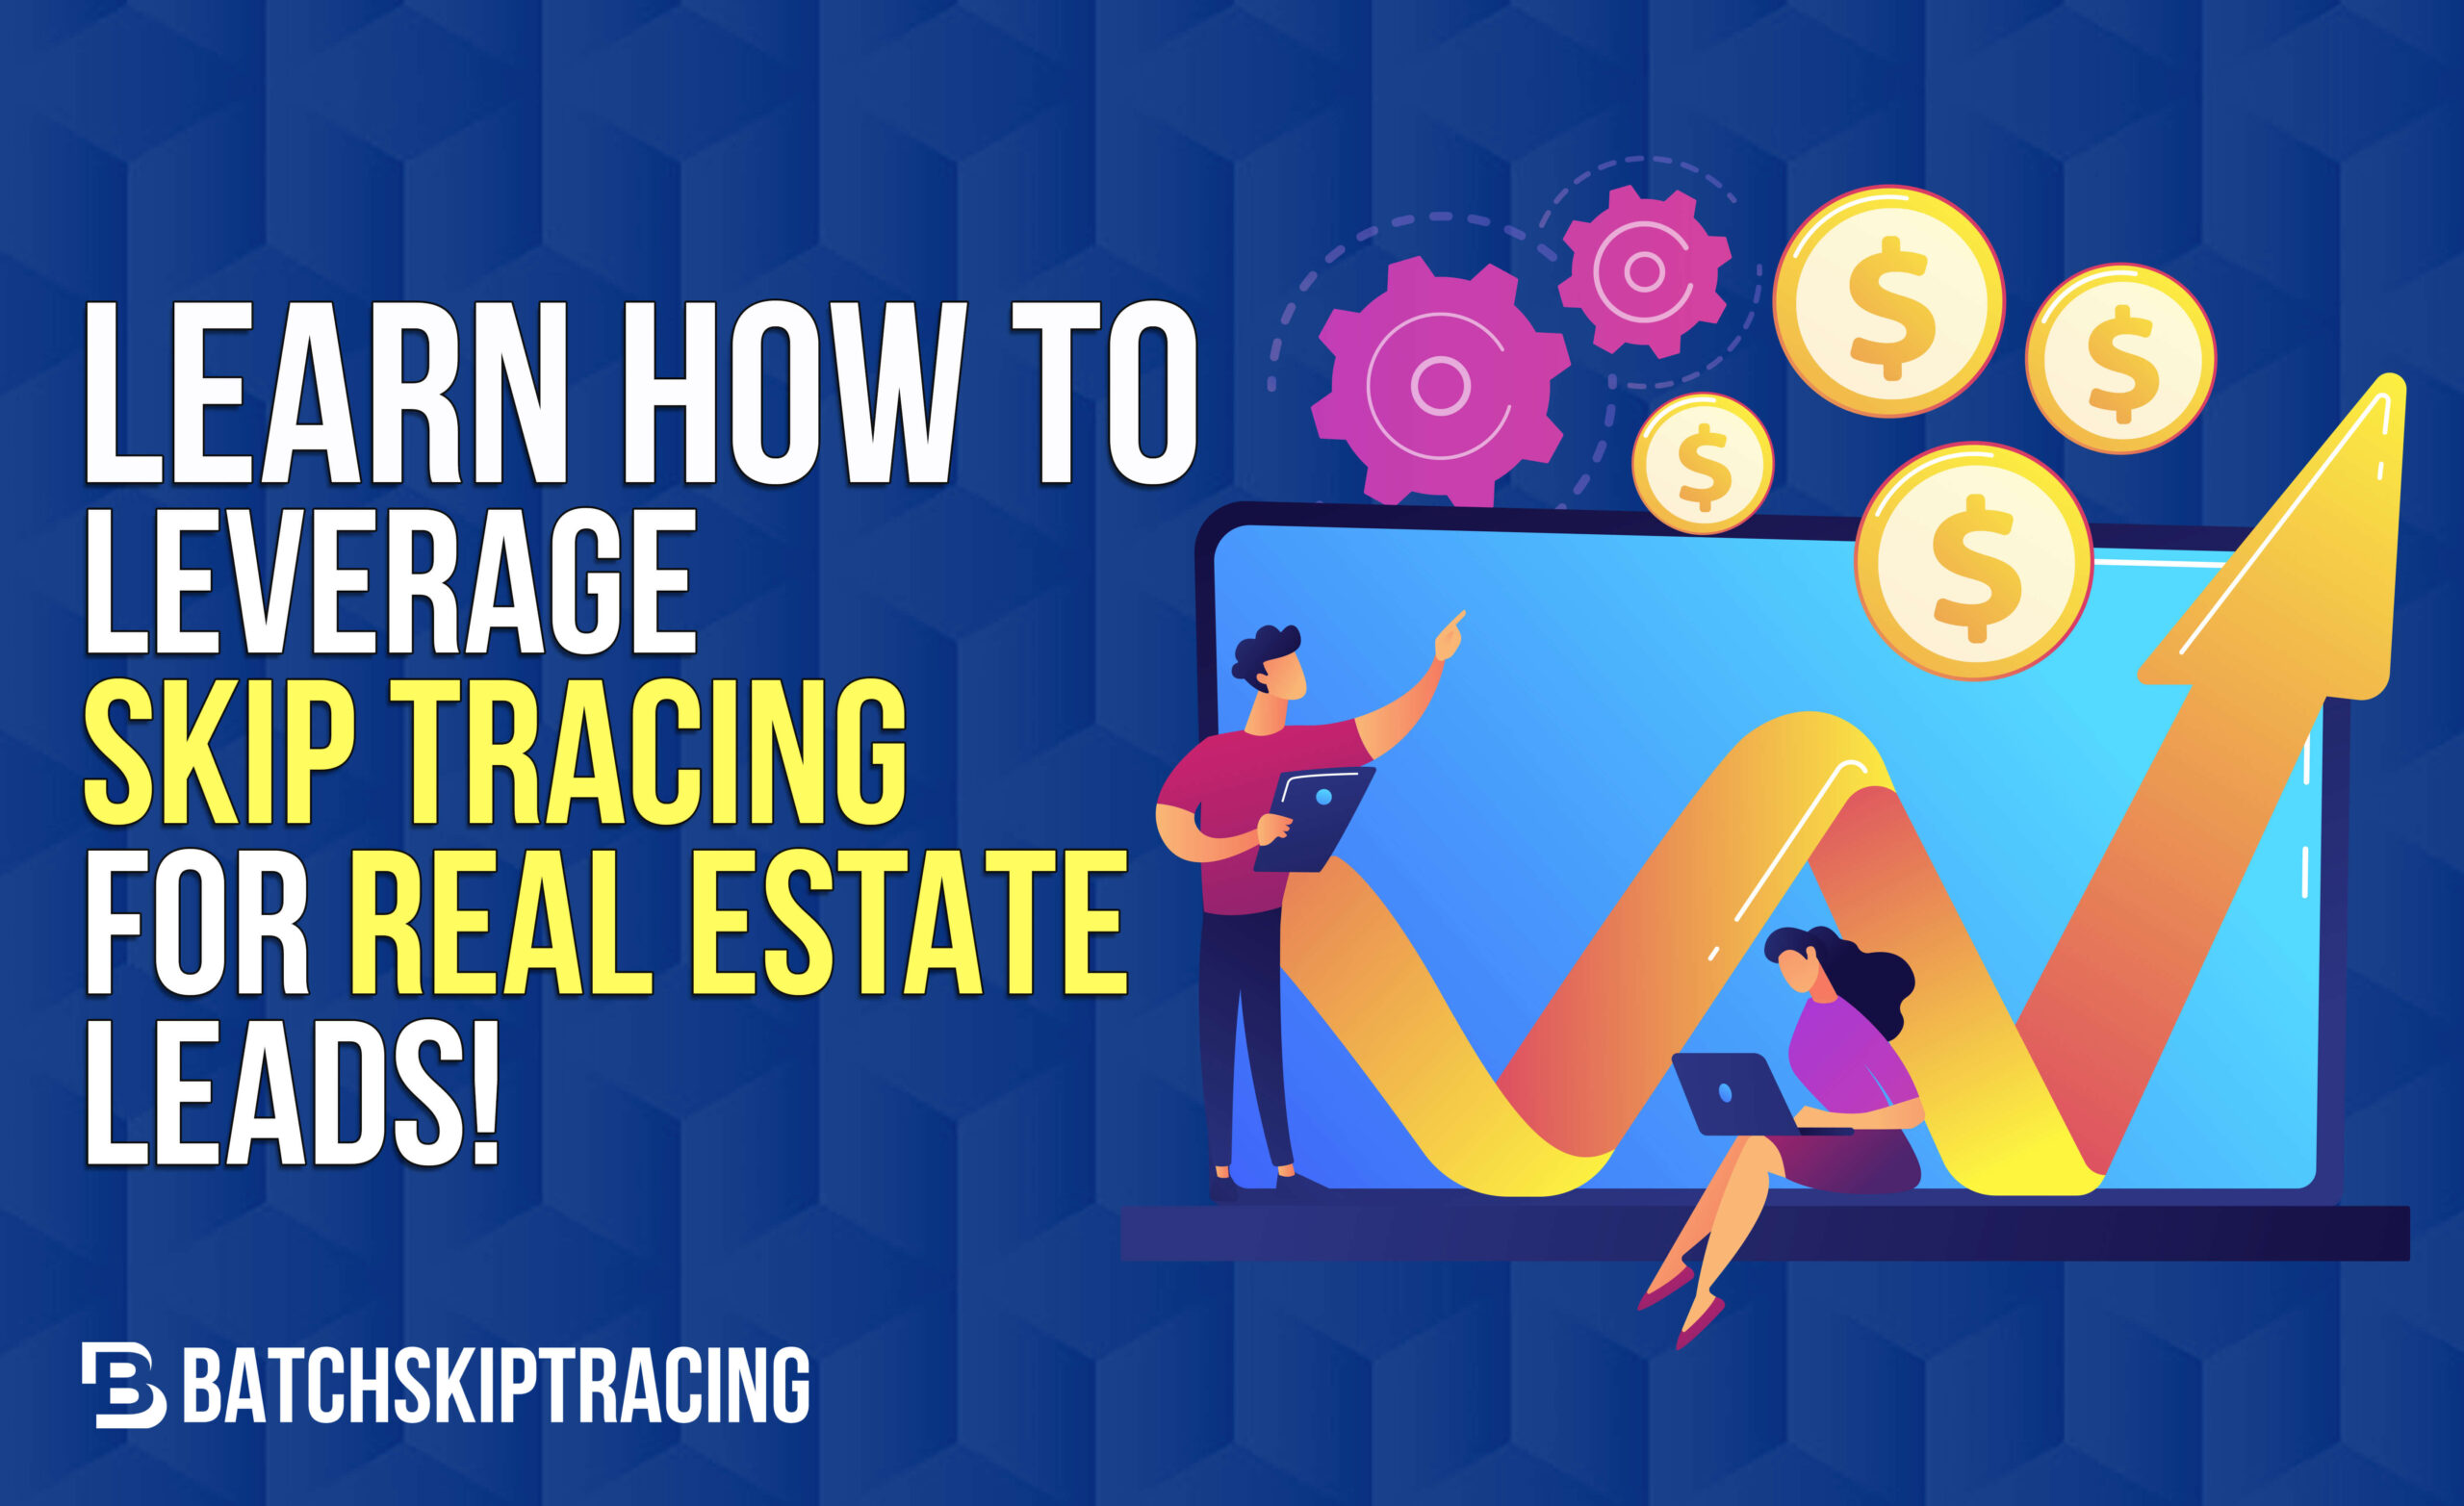 How to Leverage Skip Tracing for Real Estate Leads